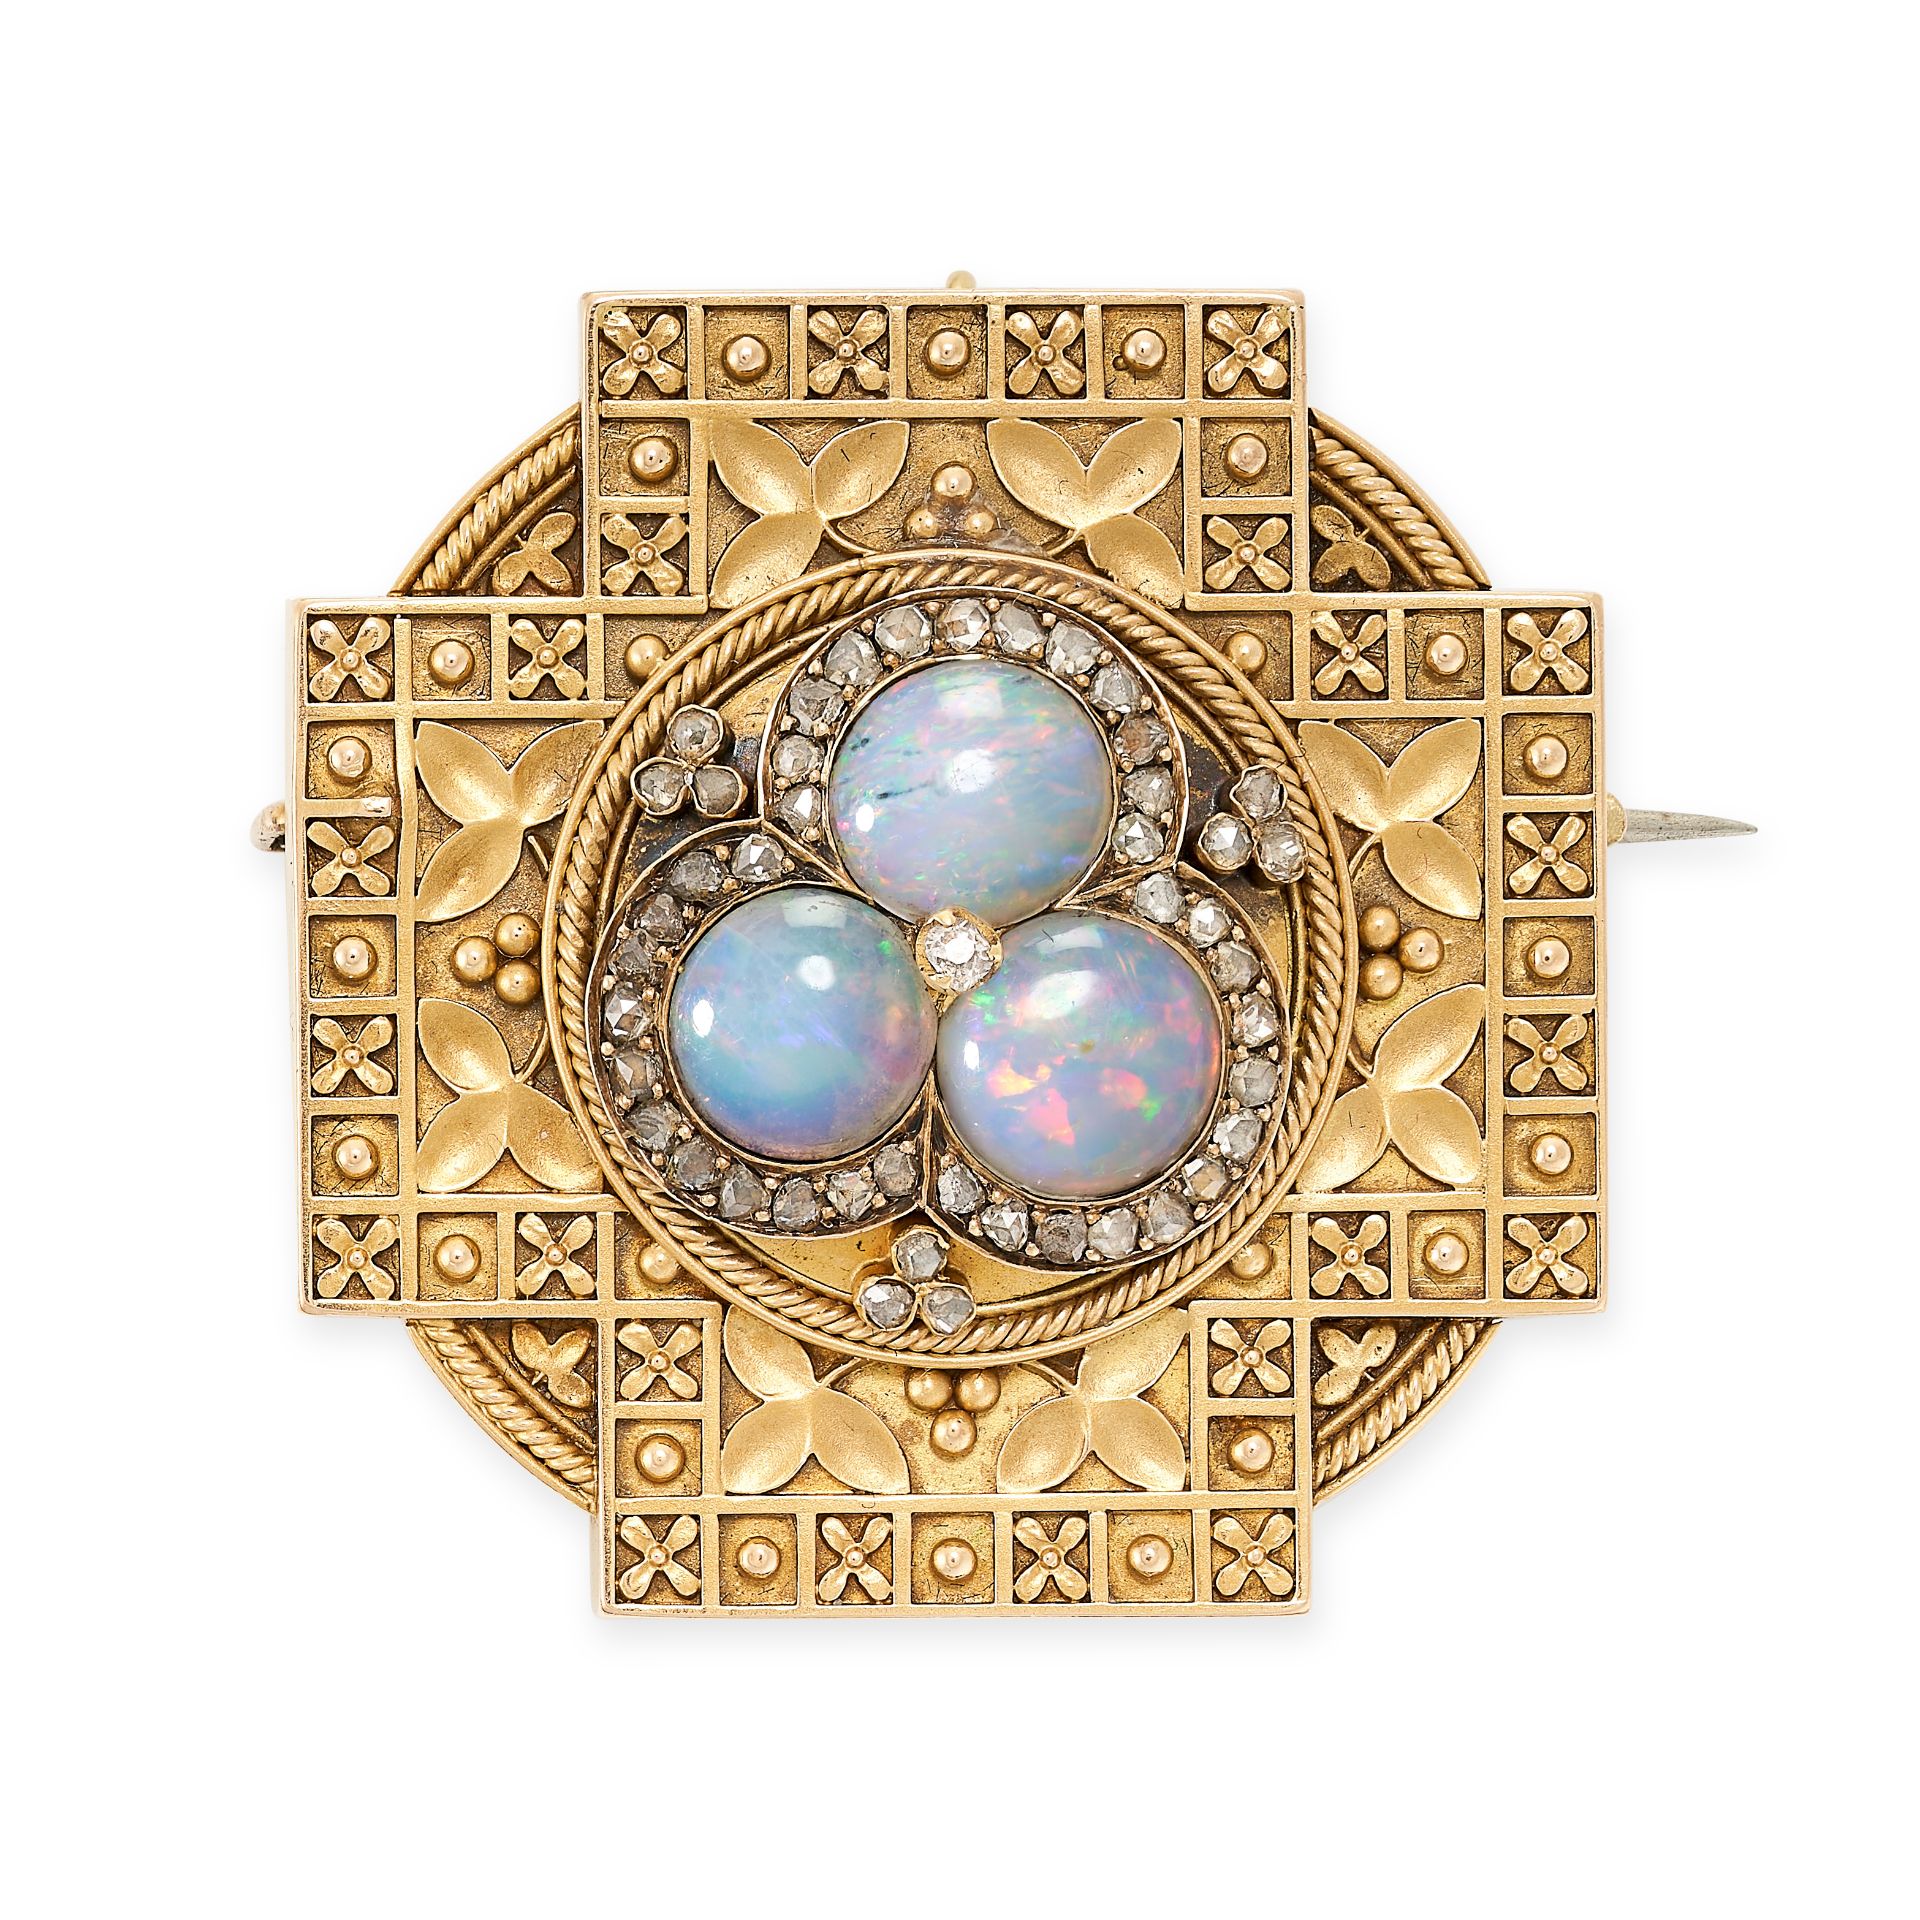 CARLO GIULIANO, A FINE ANTIQUE OPAL AND DIAMOND BROOCH in yellow gold, in the Etruscan revival